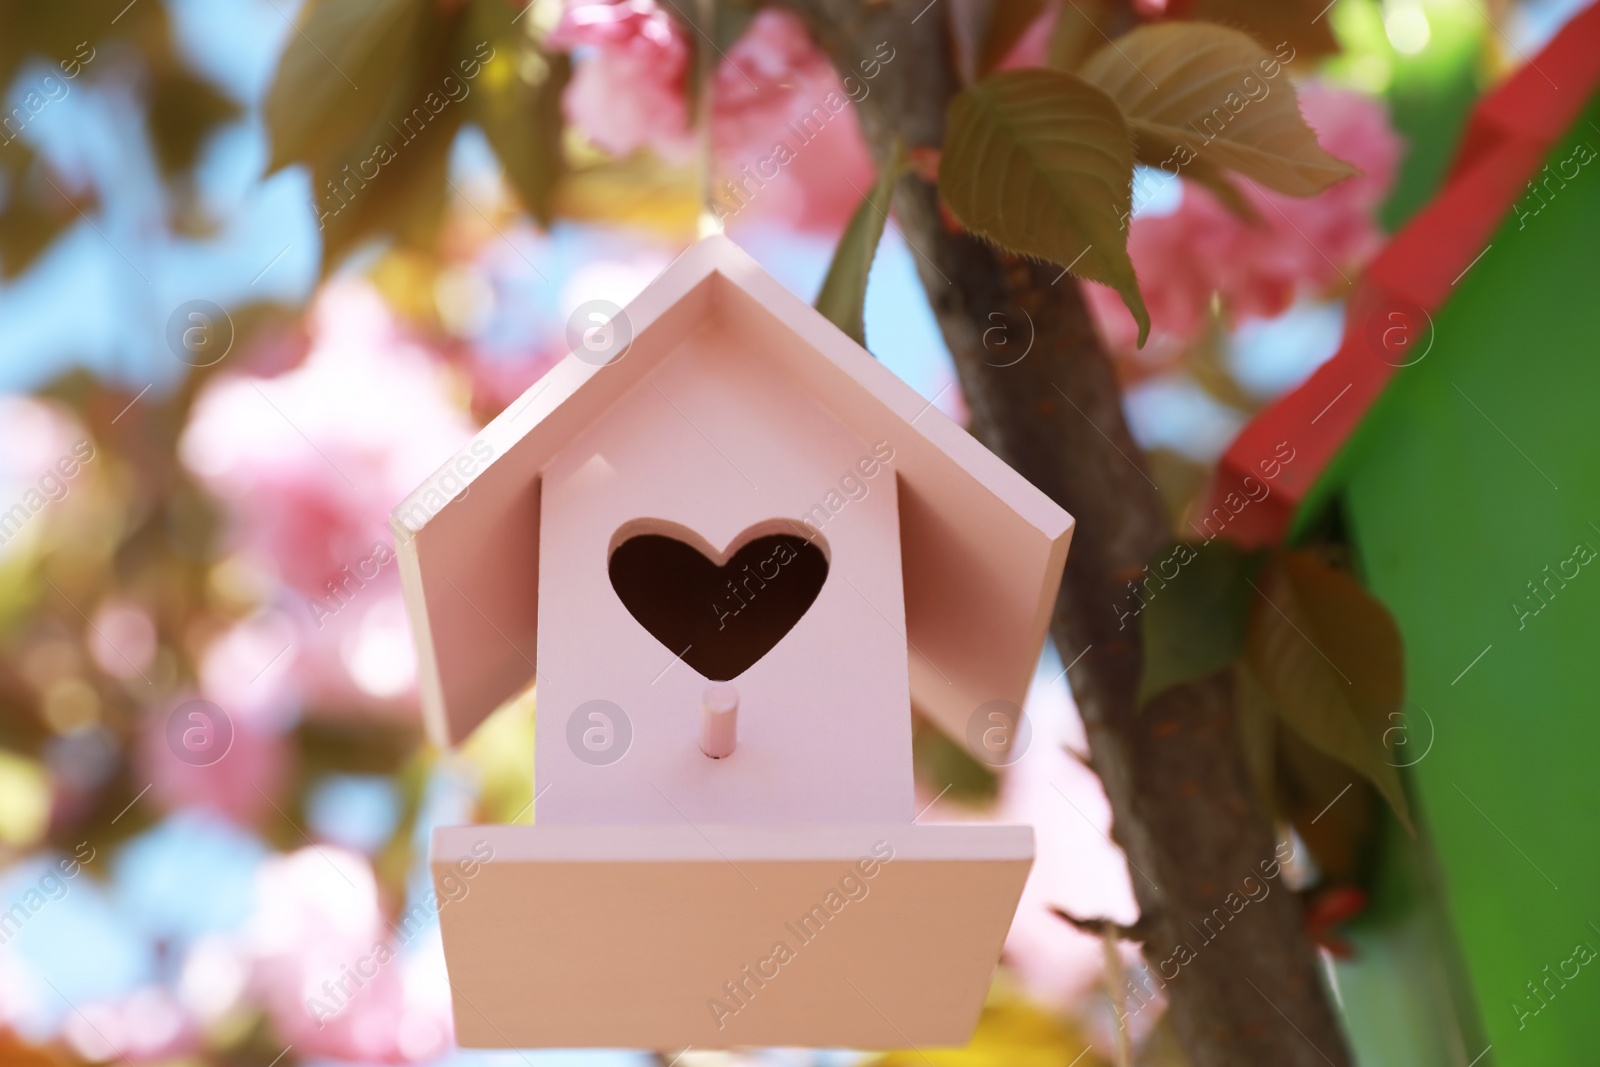 Photo of Pink bird house with heart shaped hole hanging on tree branch outdoors, low angle view